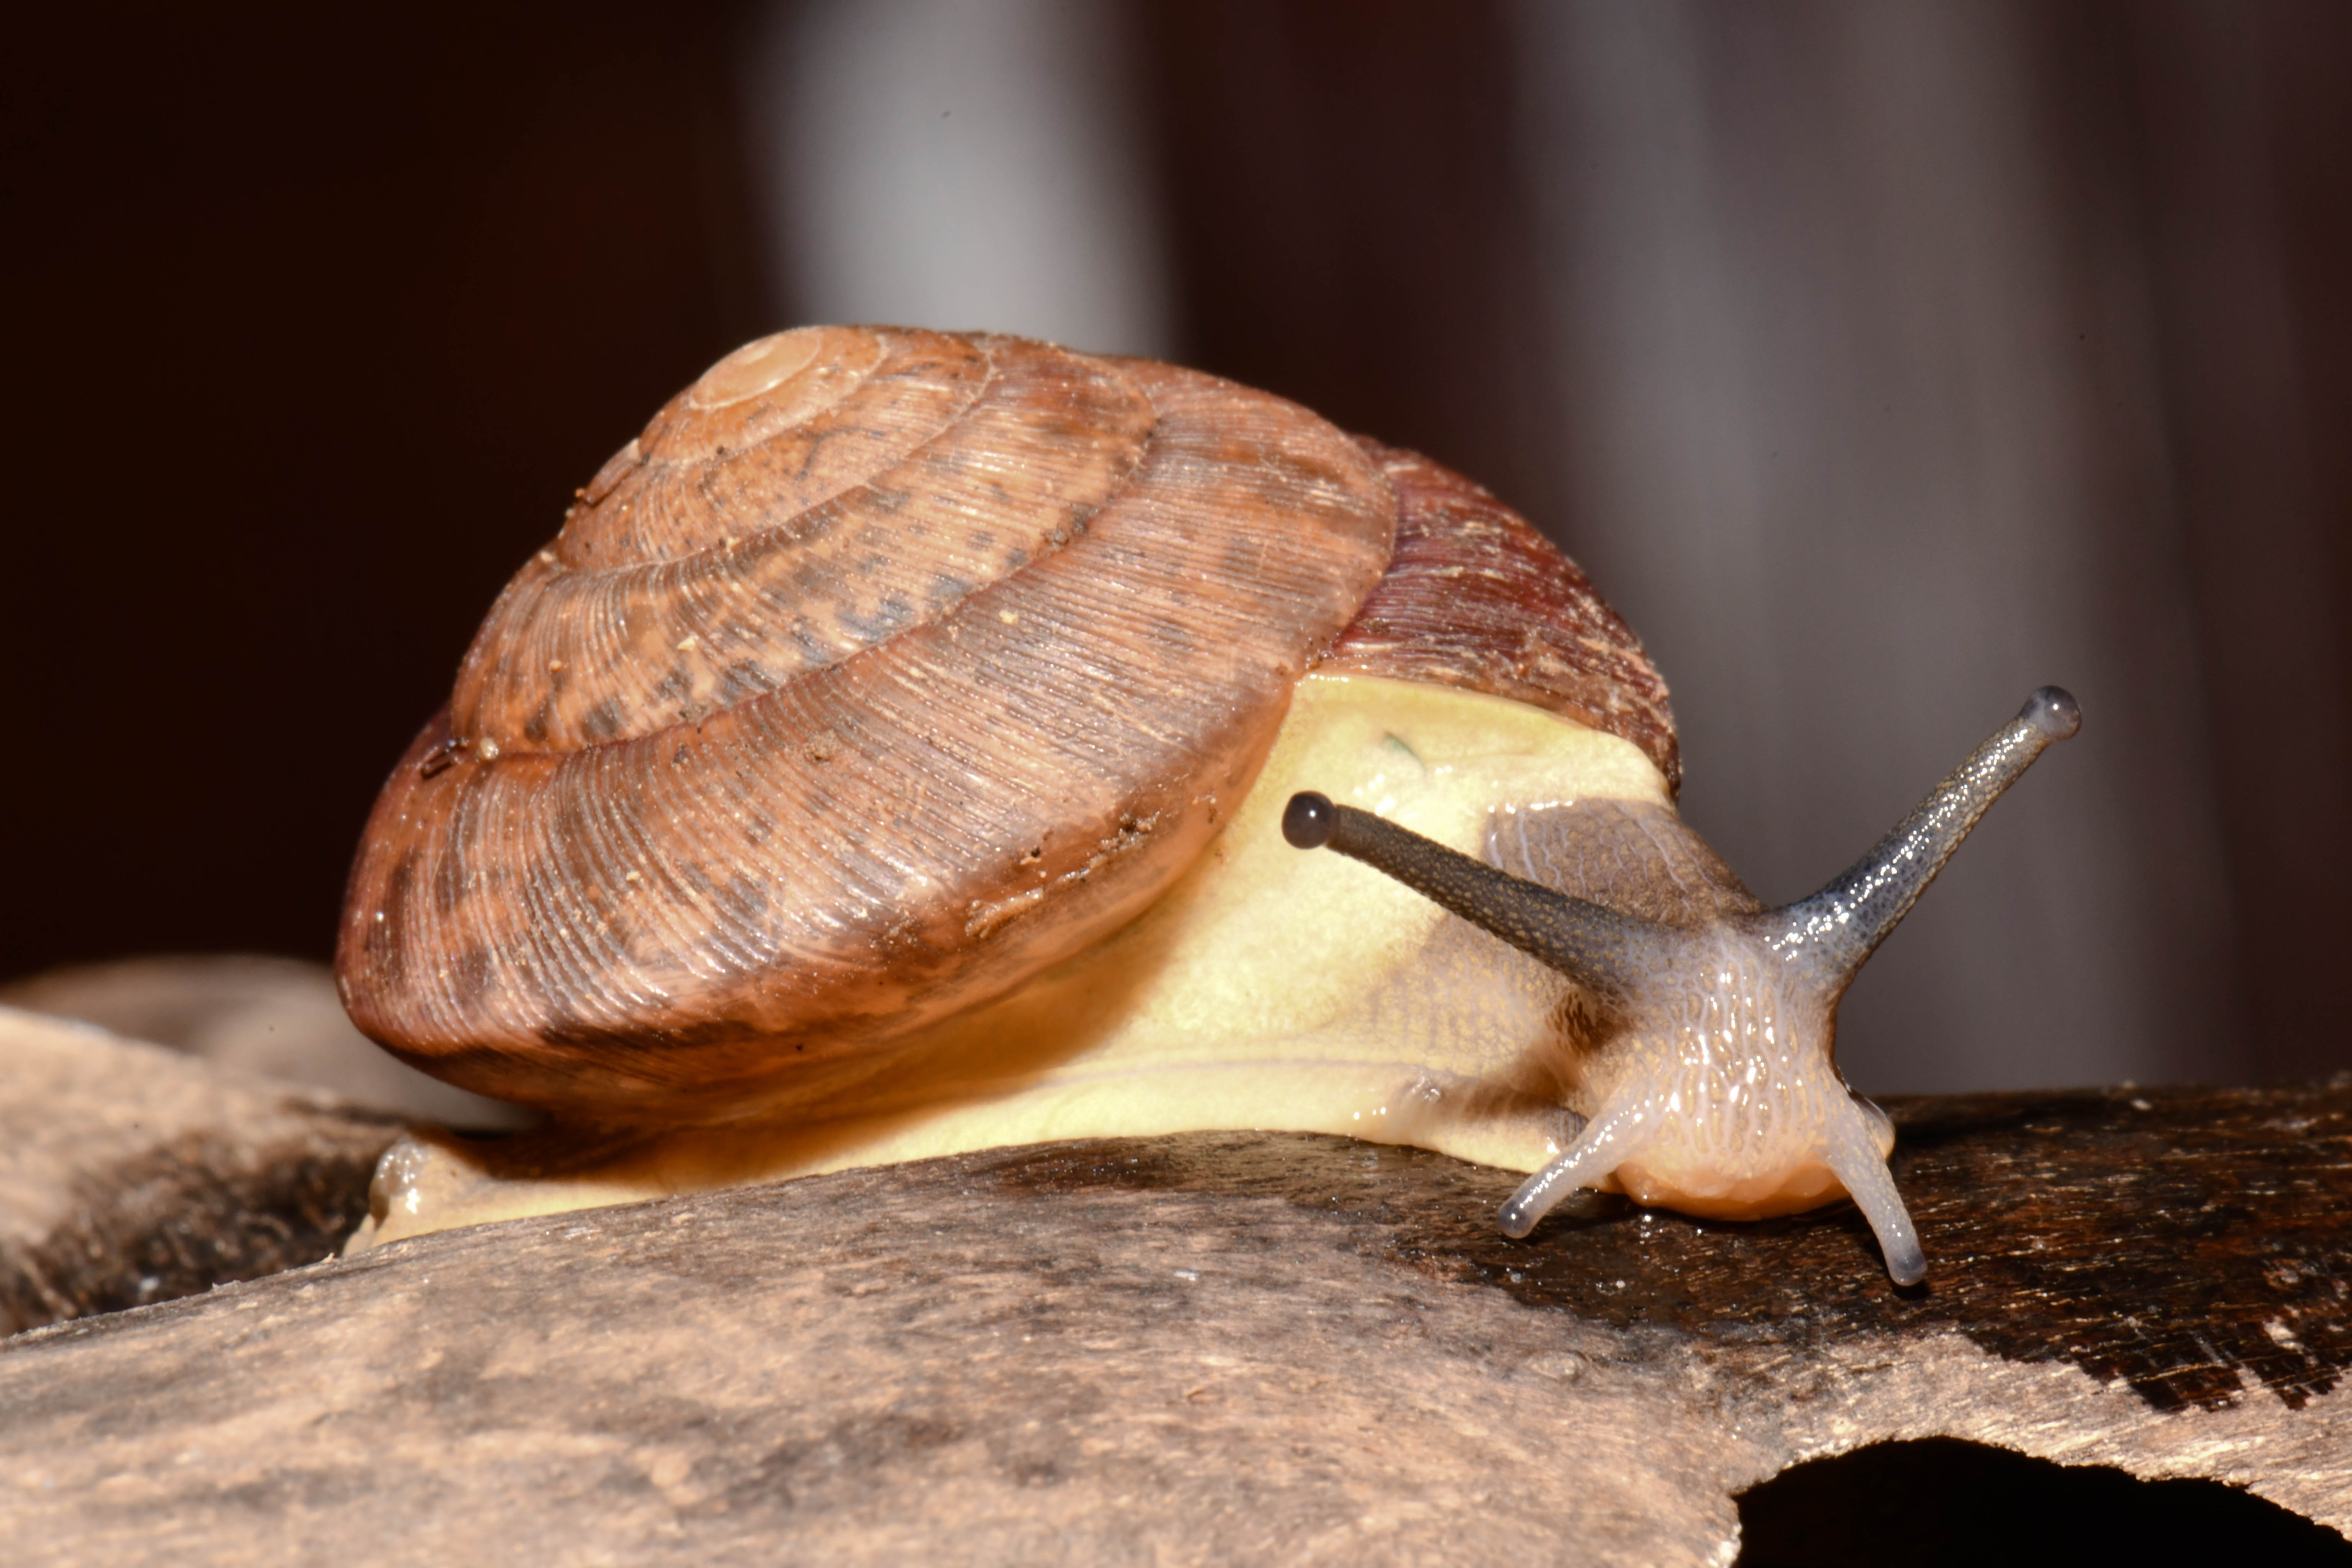 The natural land snail before being tested for luminescence and fluorescence 